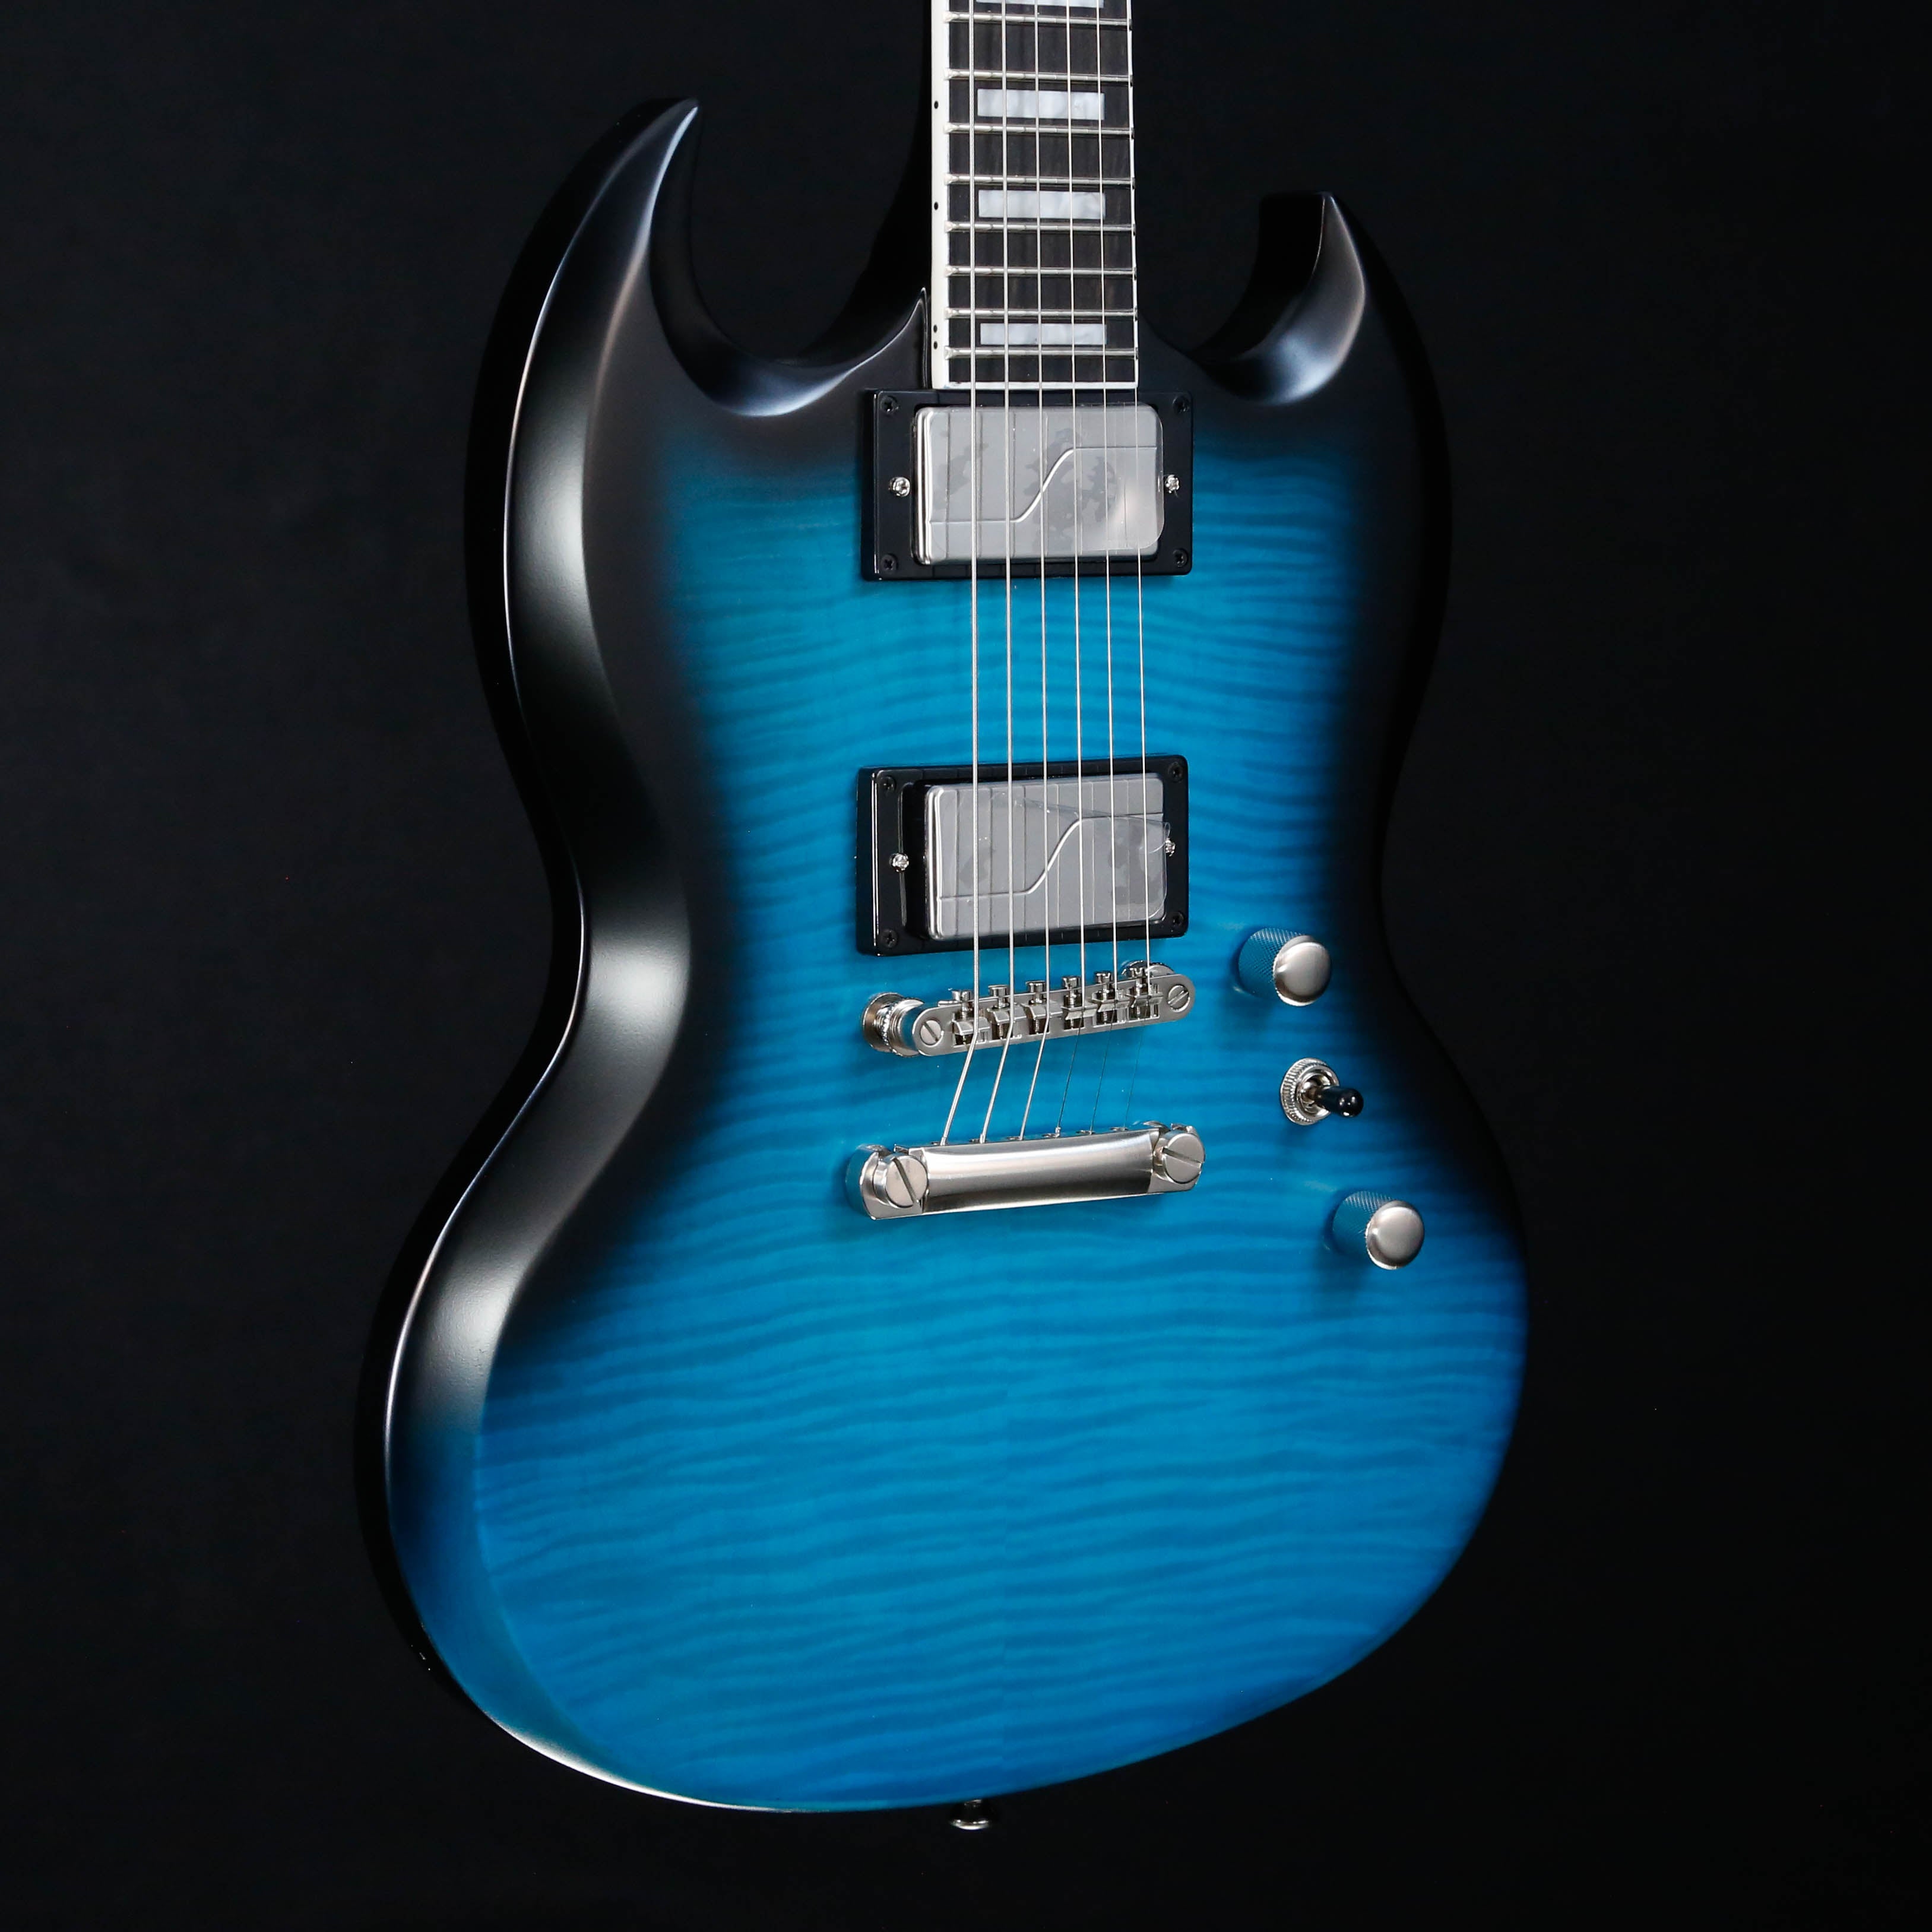 Epiphone SG Prophecy, Blue Tiger Aged Gloss